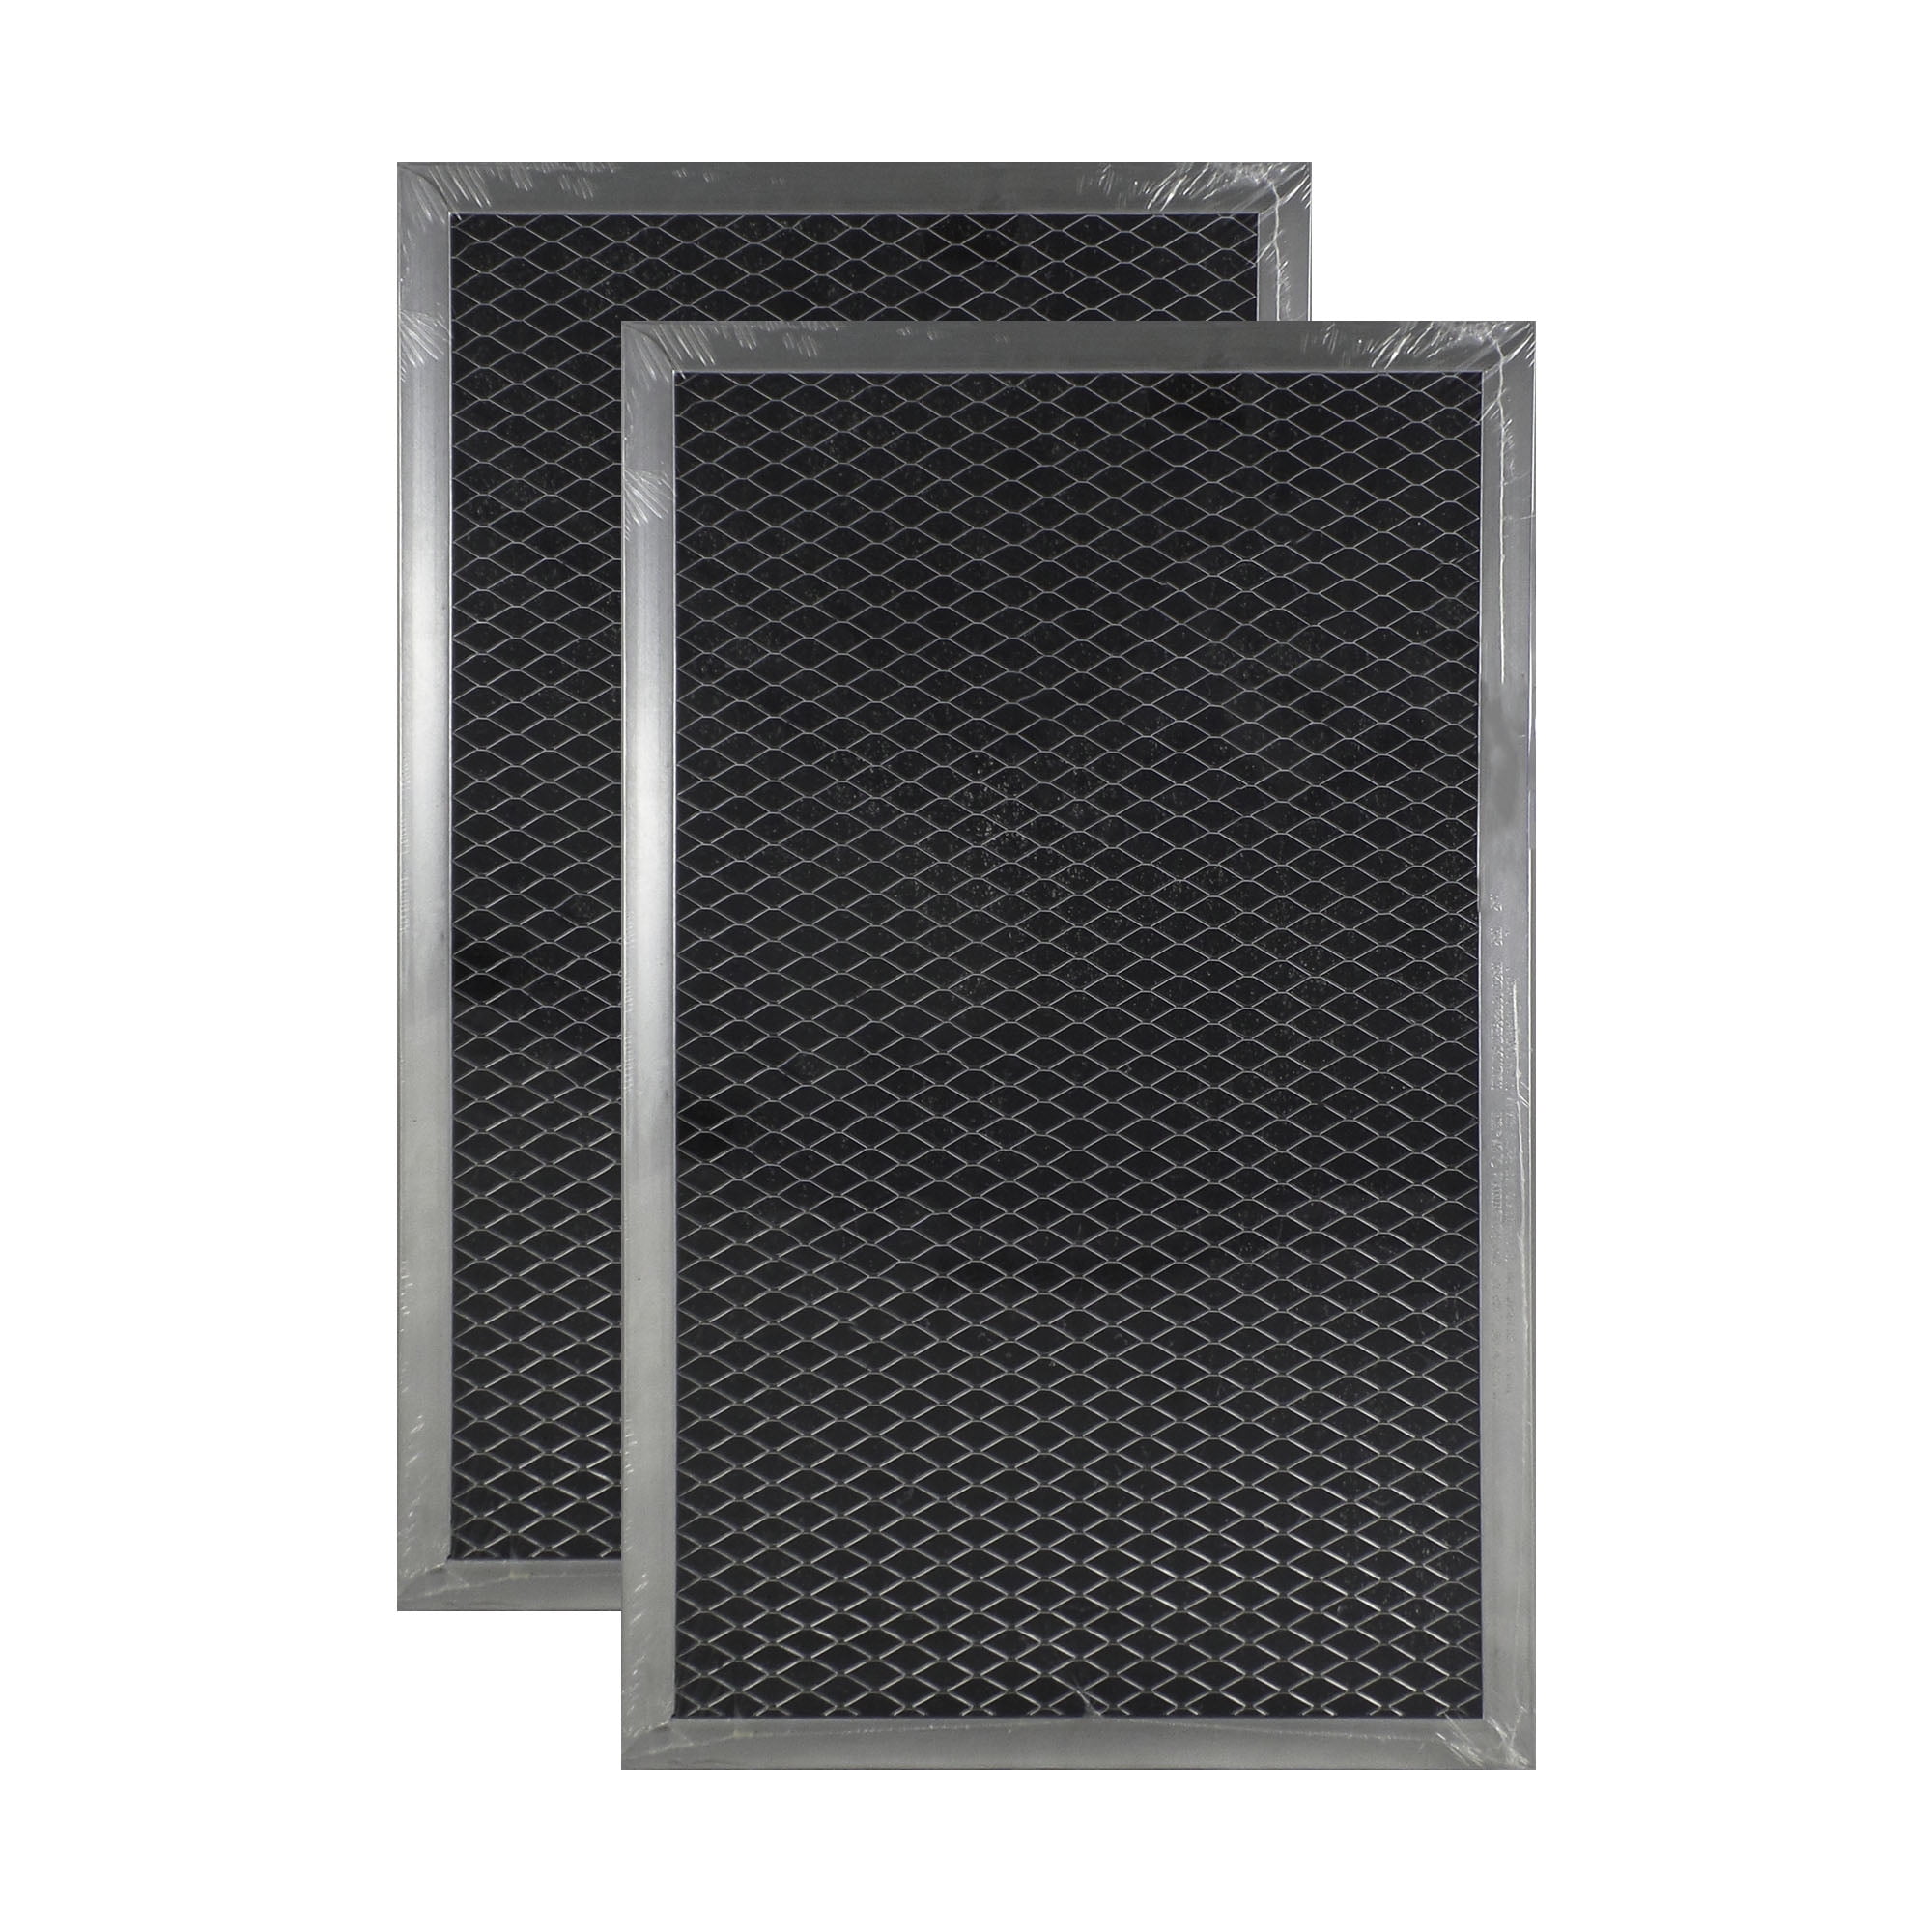 2 Filters Genuine SAMSUNG DE63-00367D Microwave Charcoal Filter 4 X 8 9/16" 